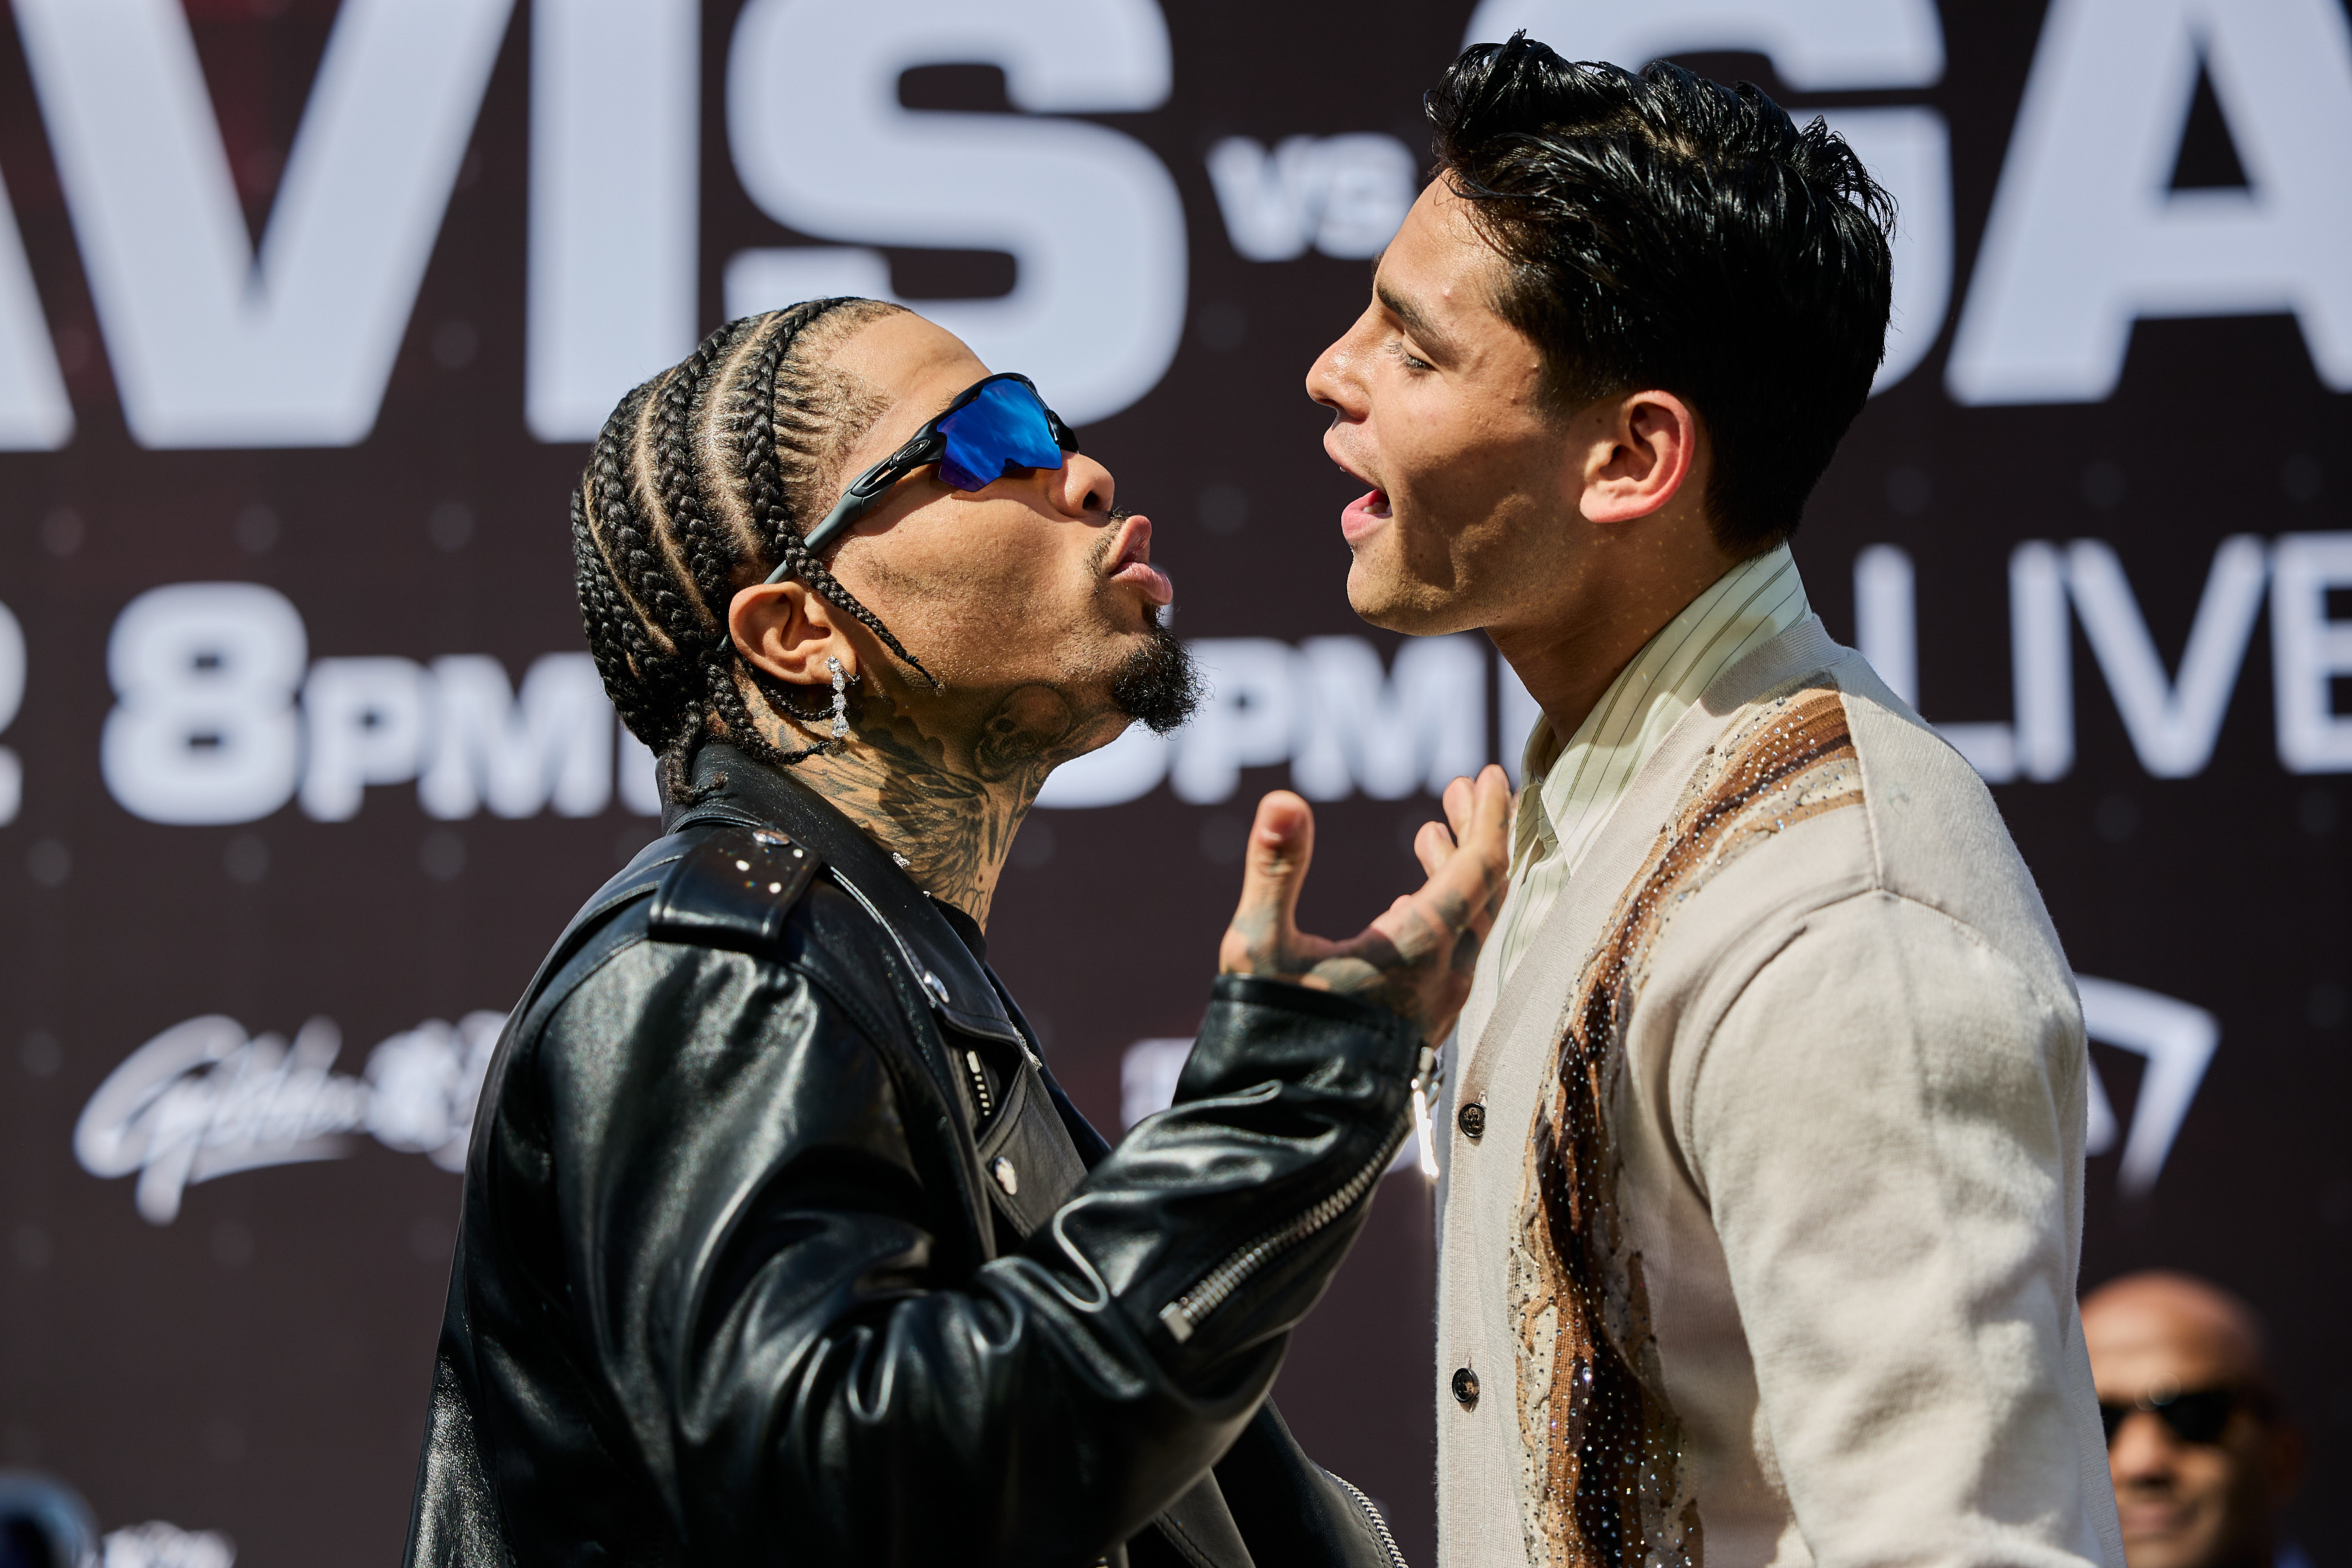 Gervonta Davis and Ryan Garcia square off at today’s final press conference